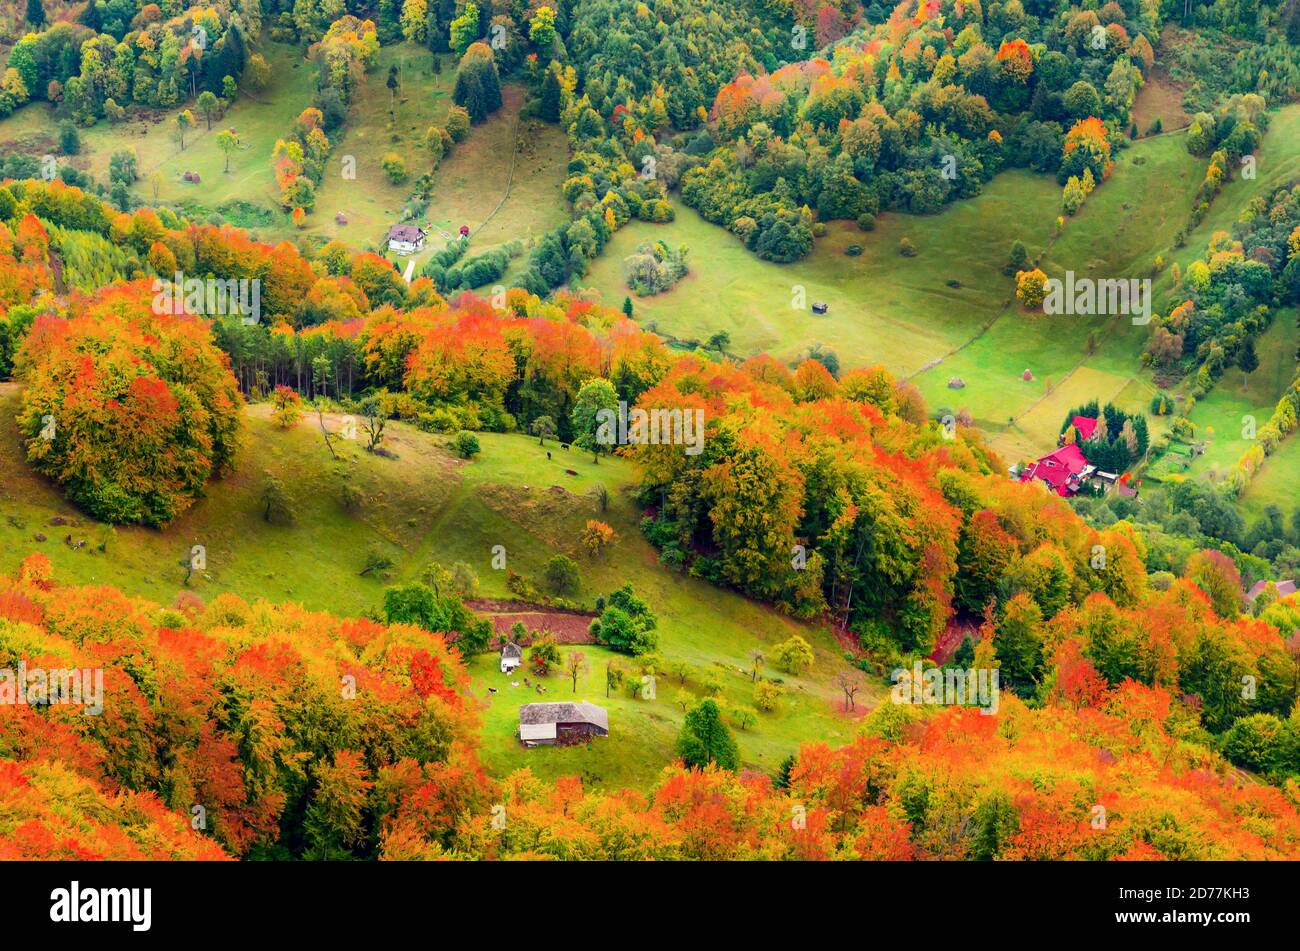 Fall landscape in the mountains. Mountain autumn scene with colorful trees in the forest. There are some houses and cottages in the meadow Stock Photo